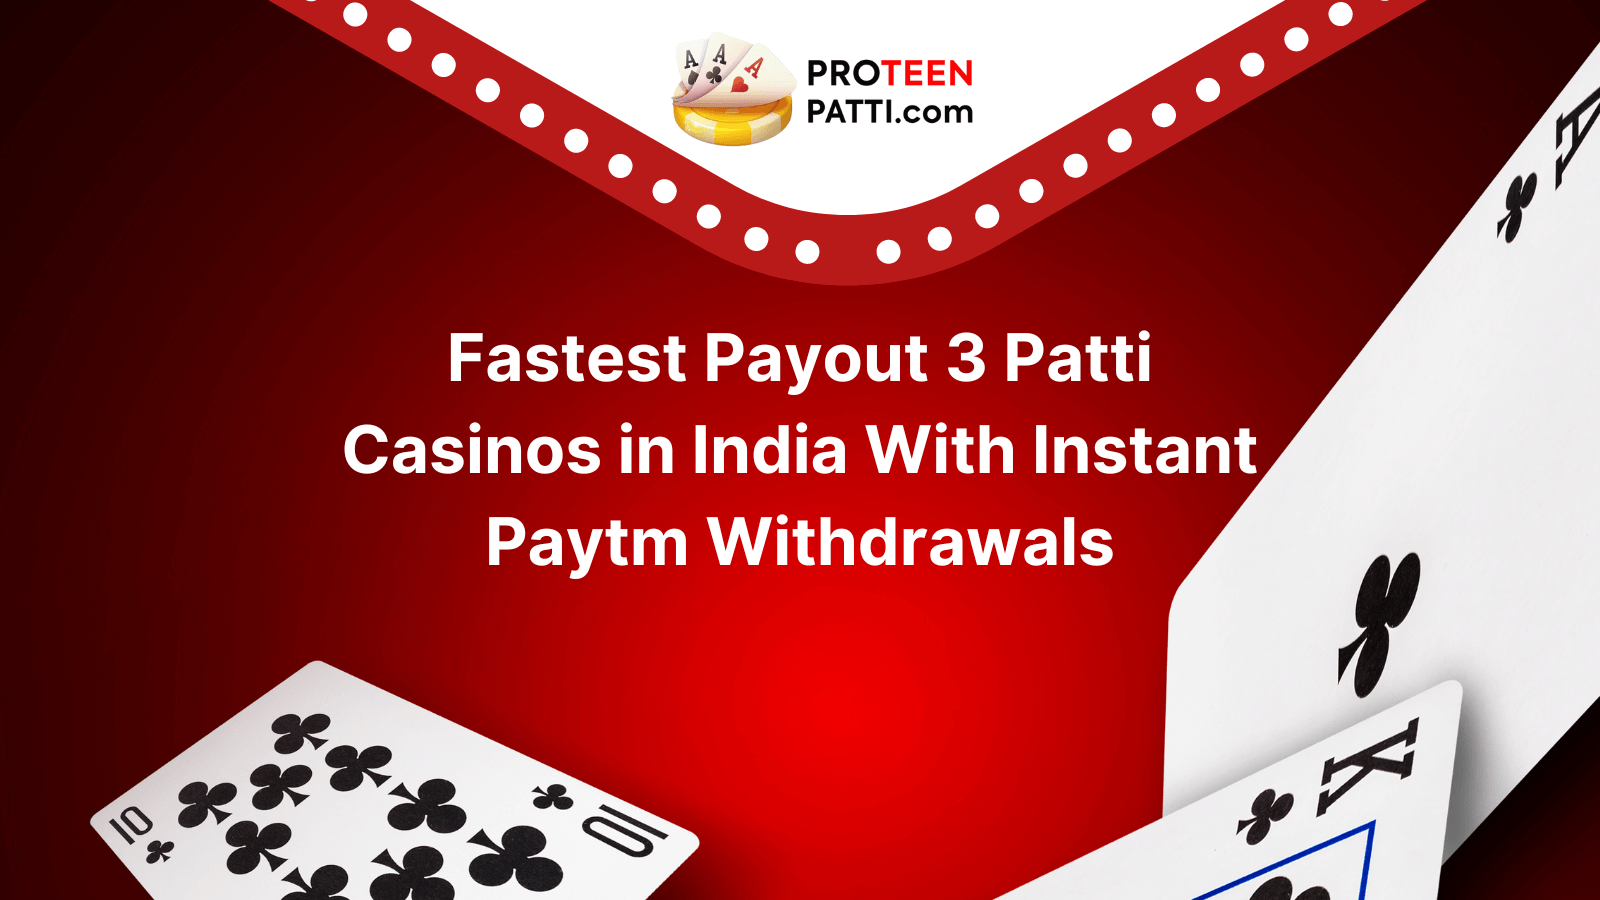 Fastest Payout 3 Patti Casinos in India With Instant Paytm Withdrawals